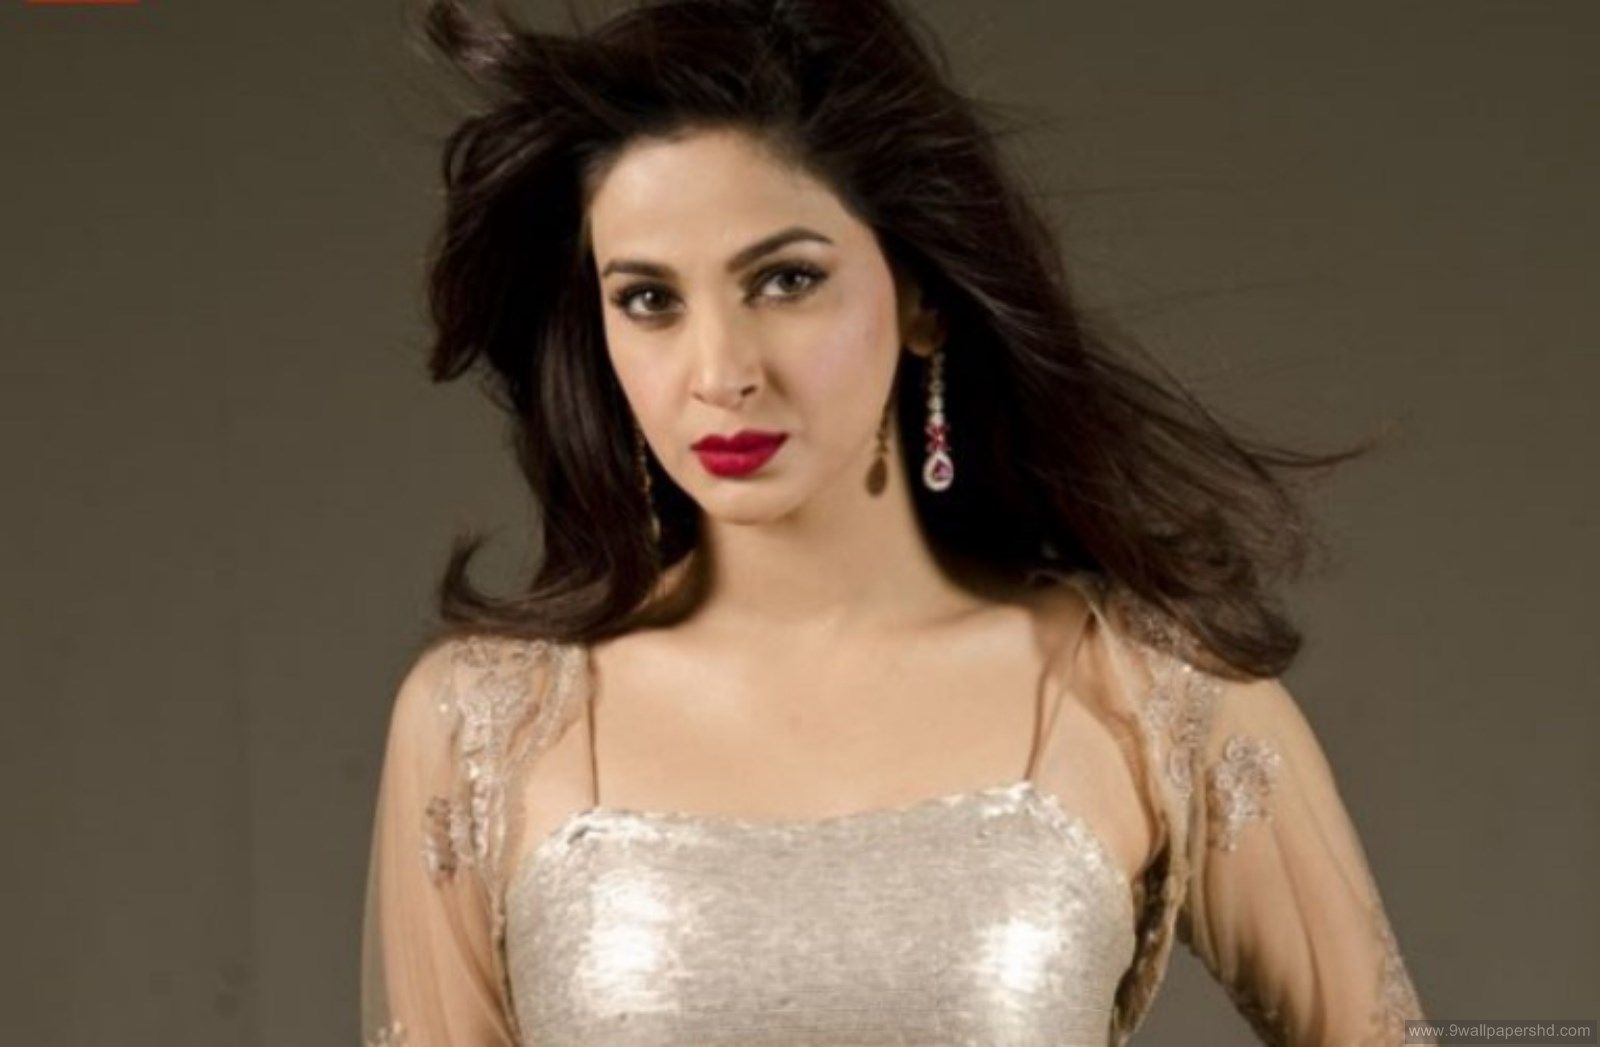 22 Pakistani Actresses Who Can Give Tough Competition